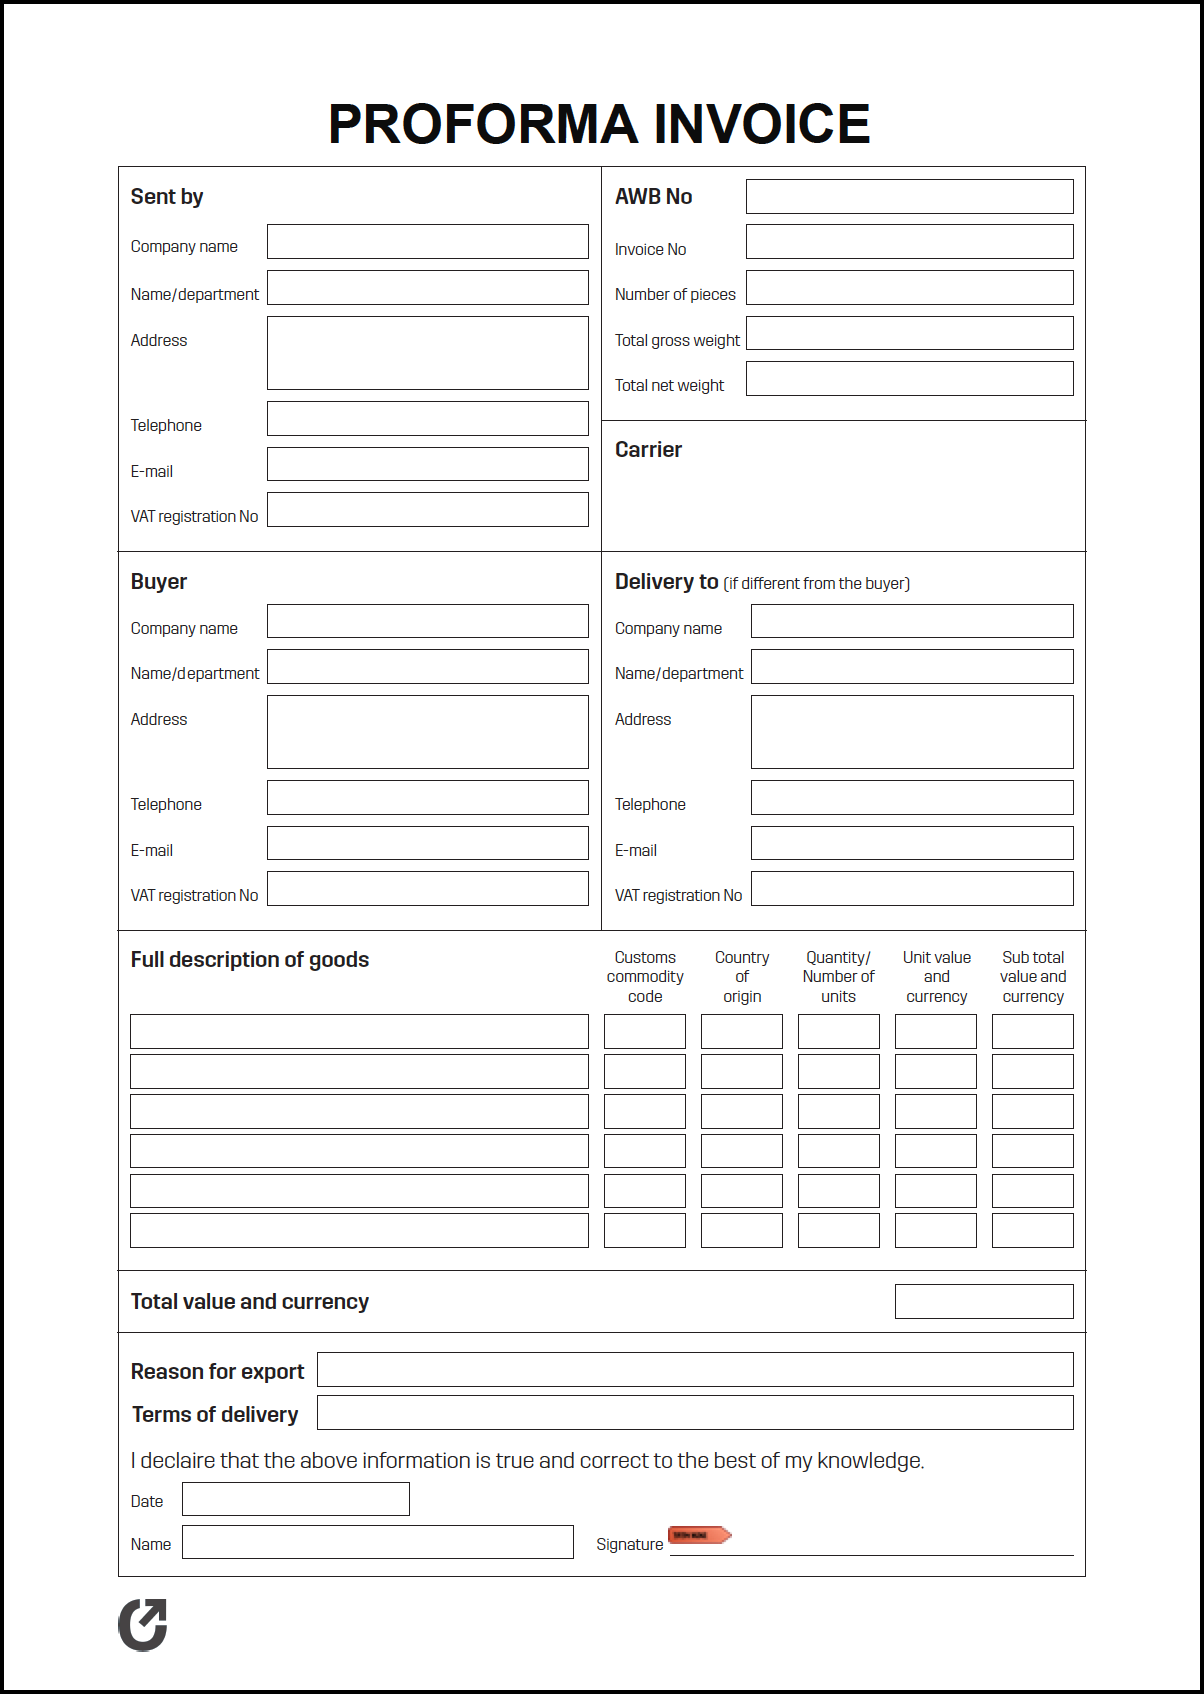 free professional invoice template word